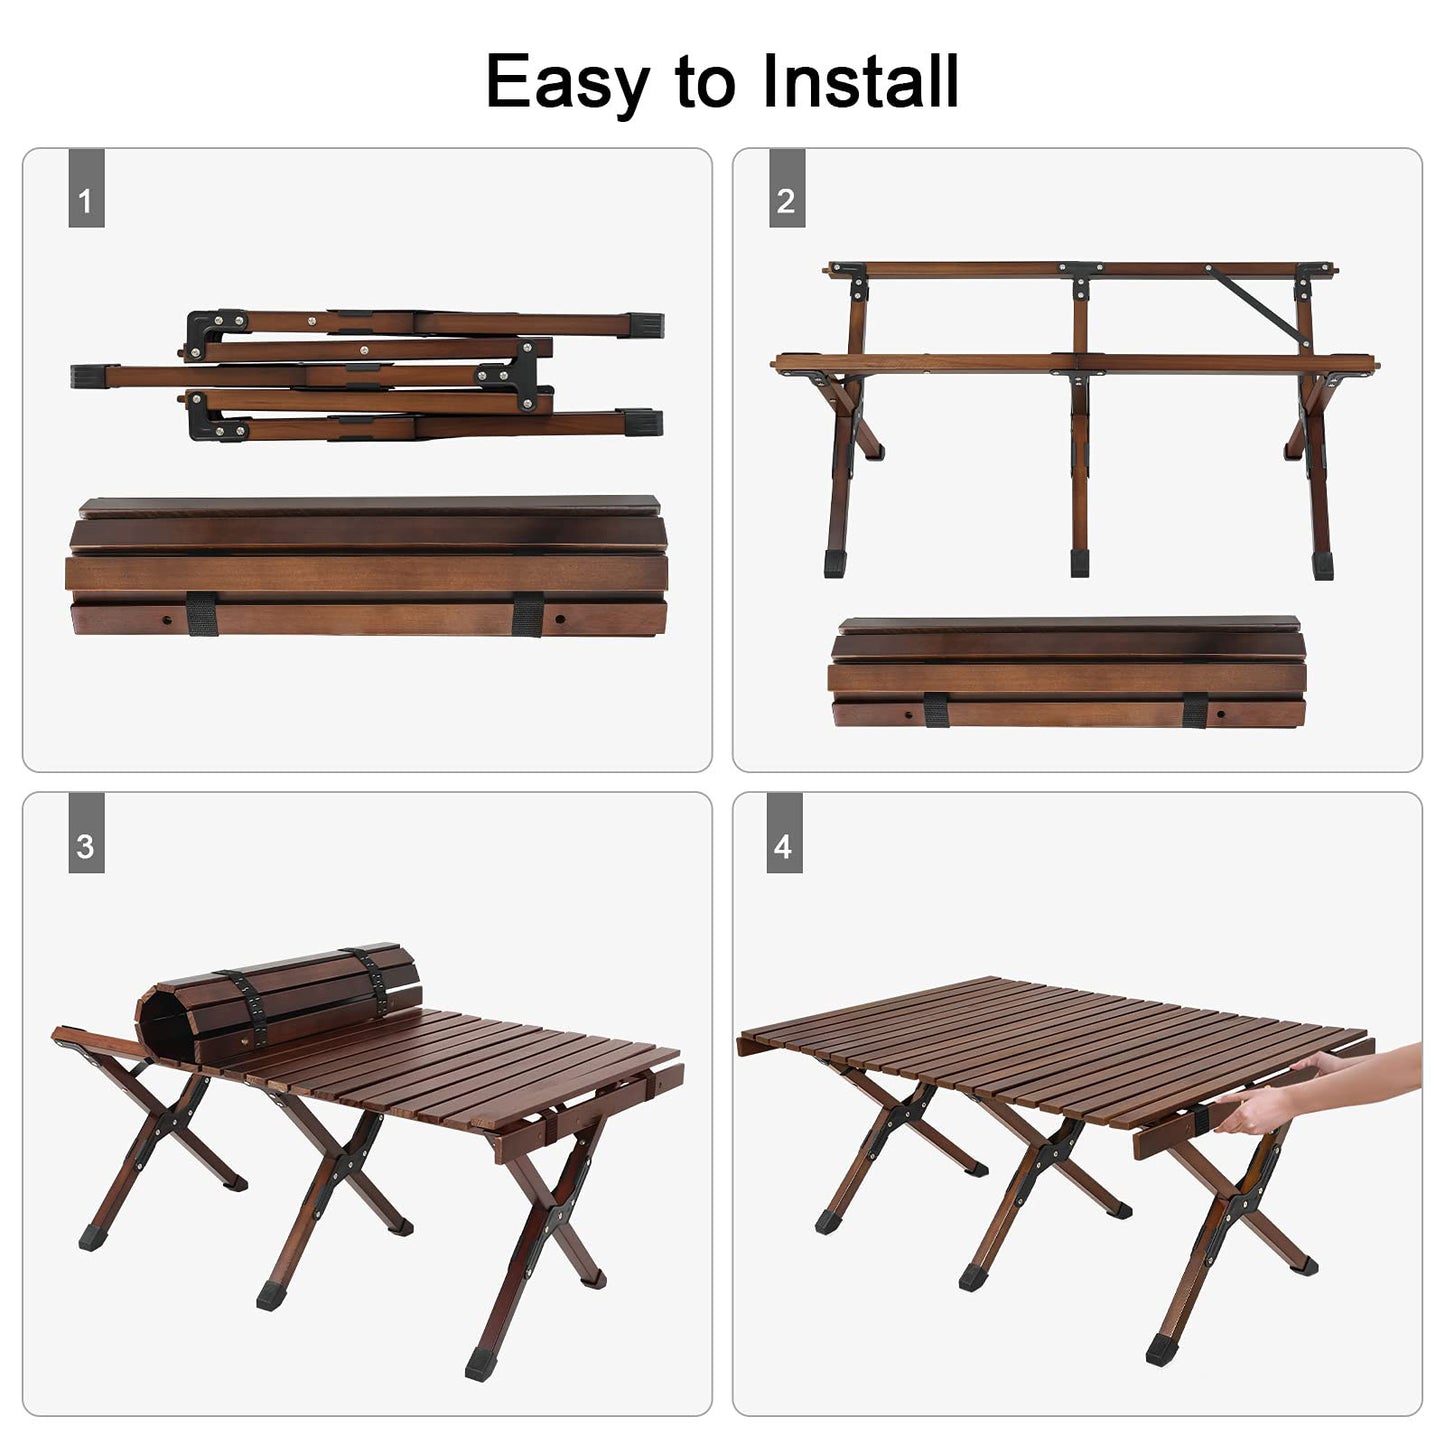 Camping Table, Wooden Folding Picnic Table in a Carry Bag